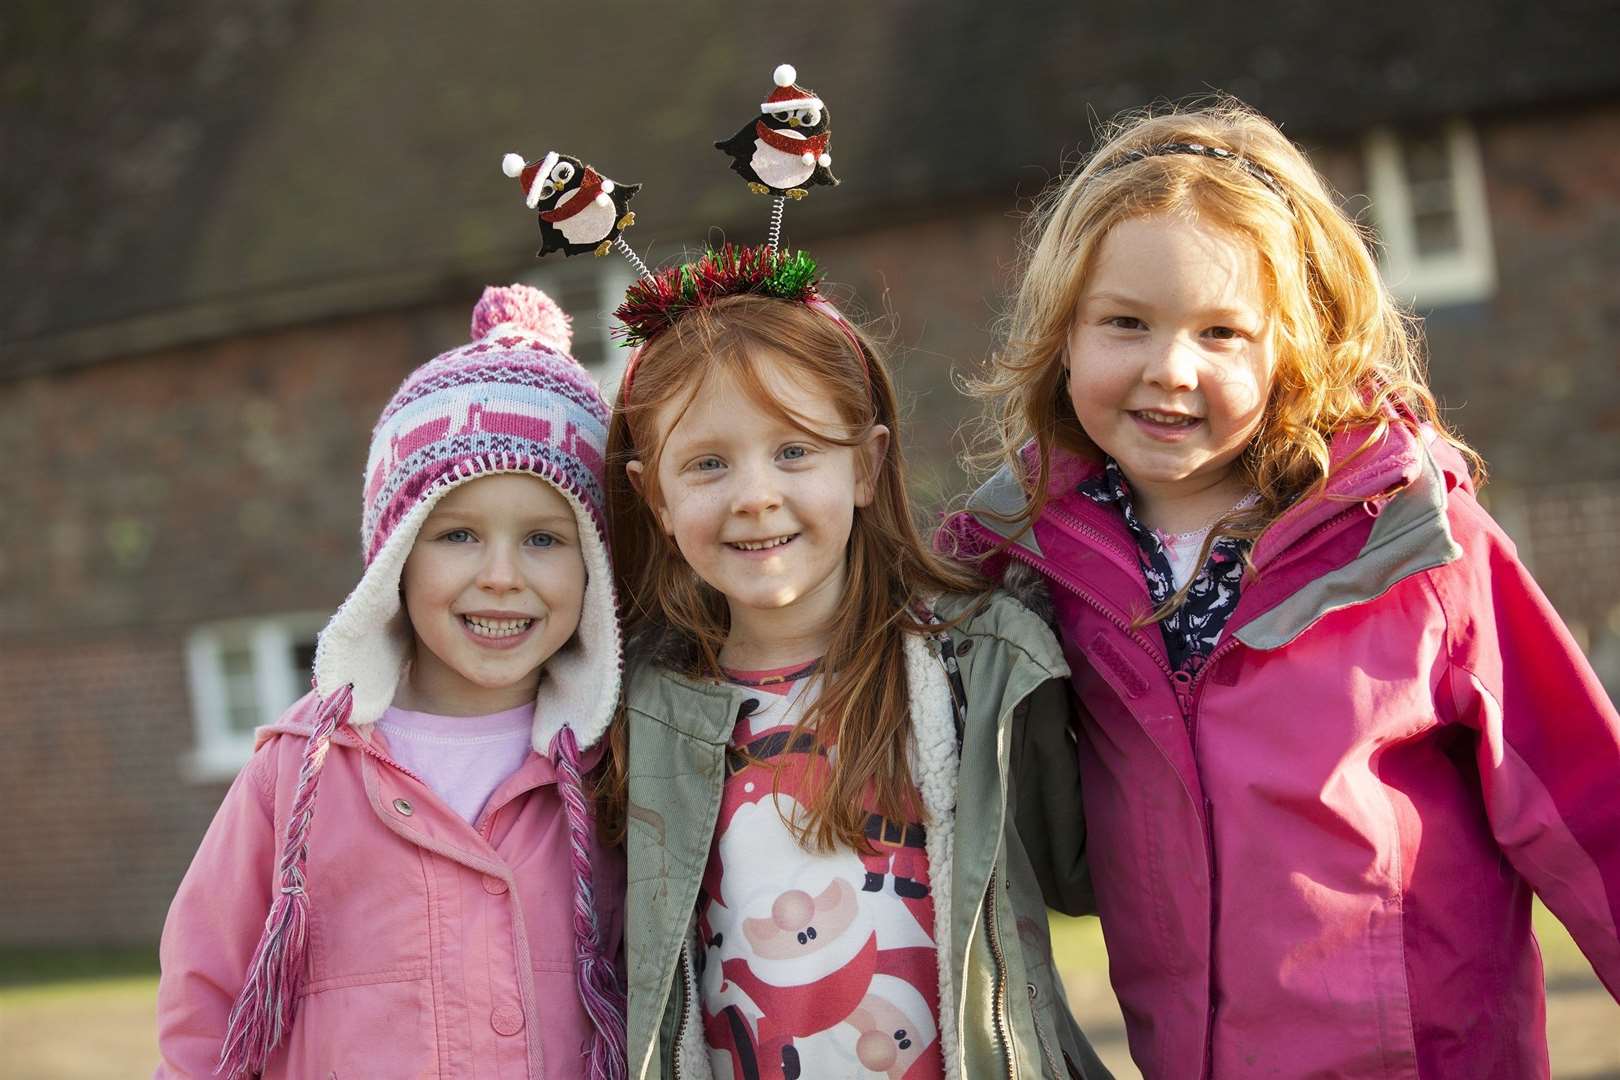 Families who want to get the kids outside after Christmas are being offered a £5 ticket deal via Kent Life's facebook page